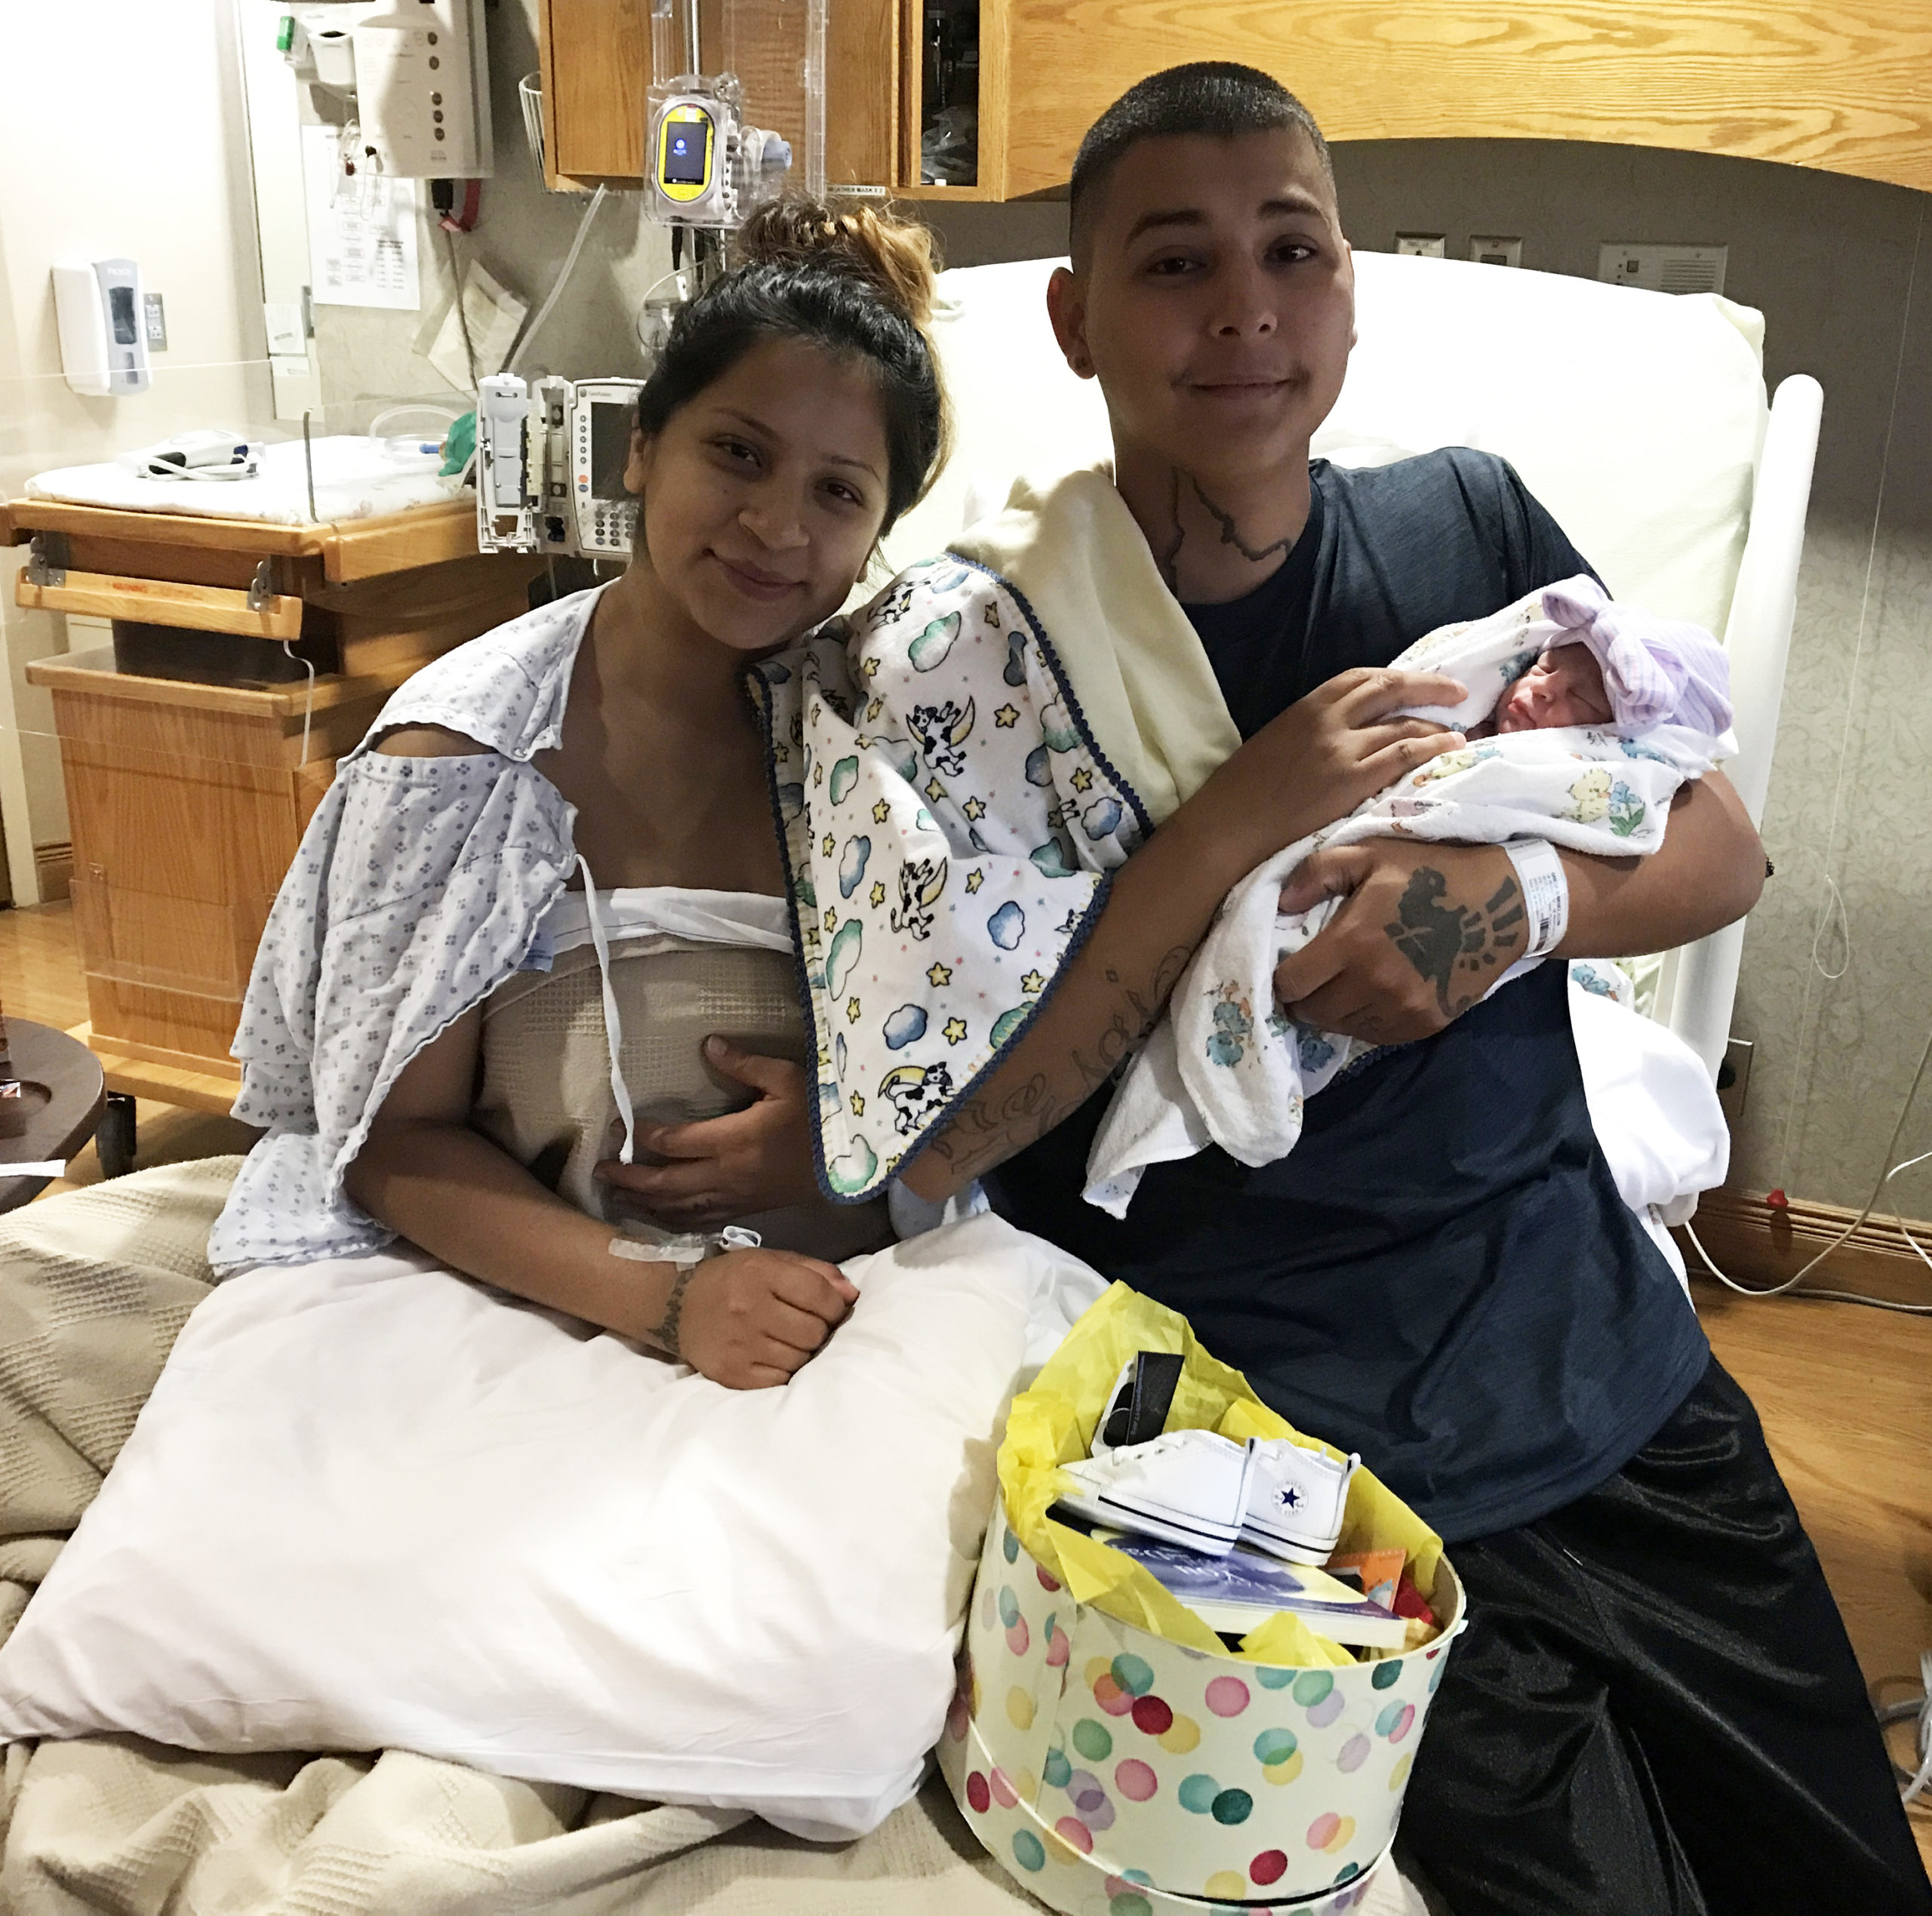 Mom and dad with newborn baby in hospital bed